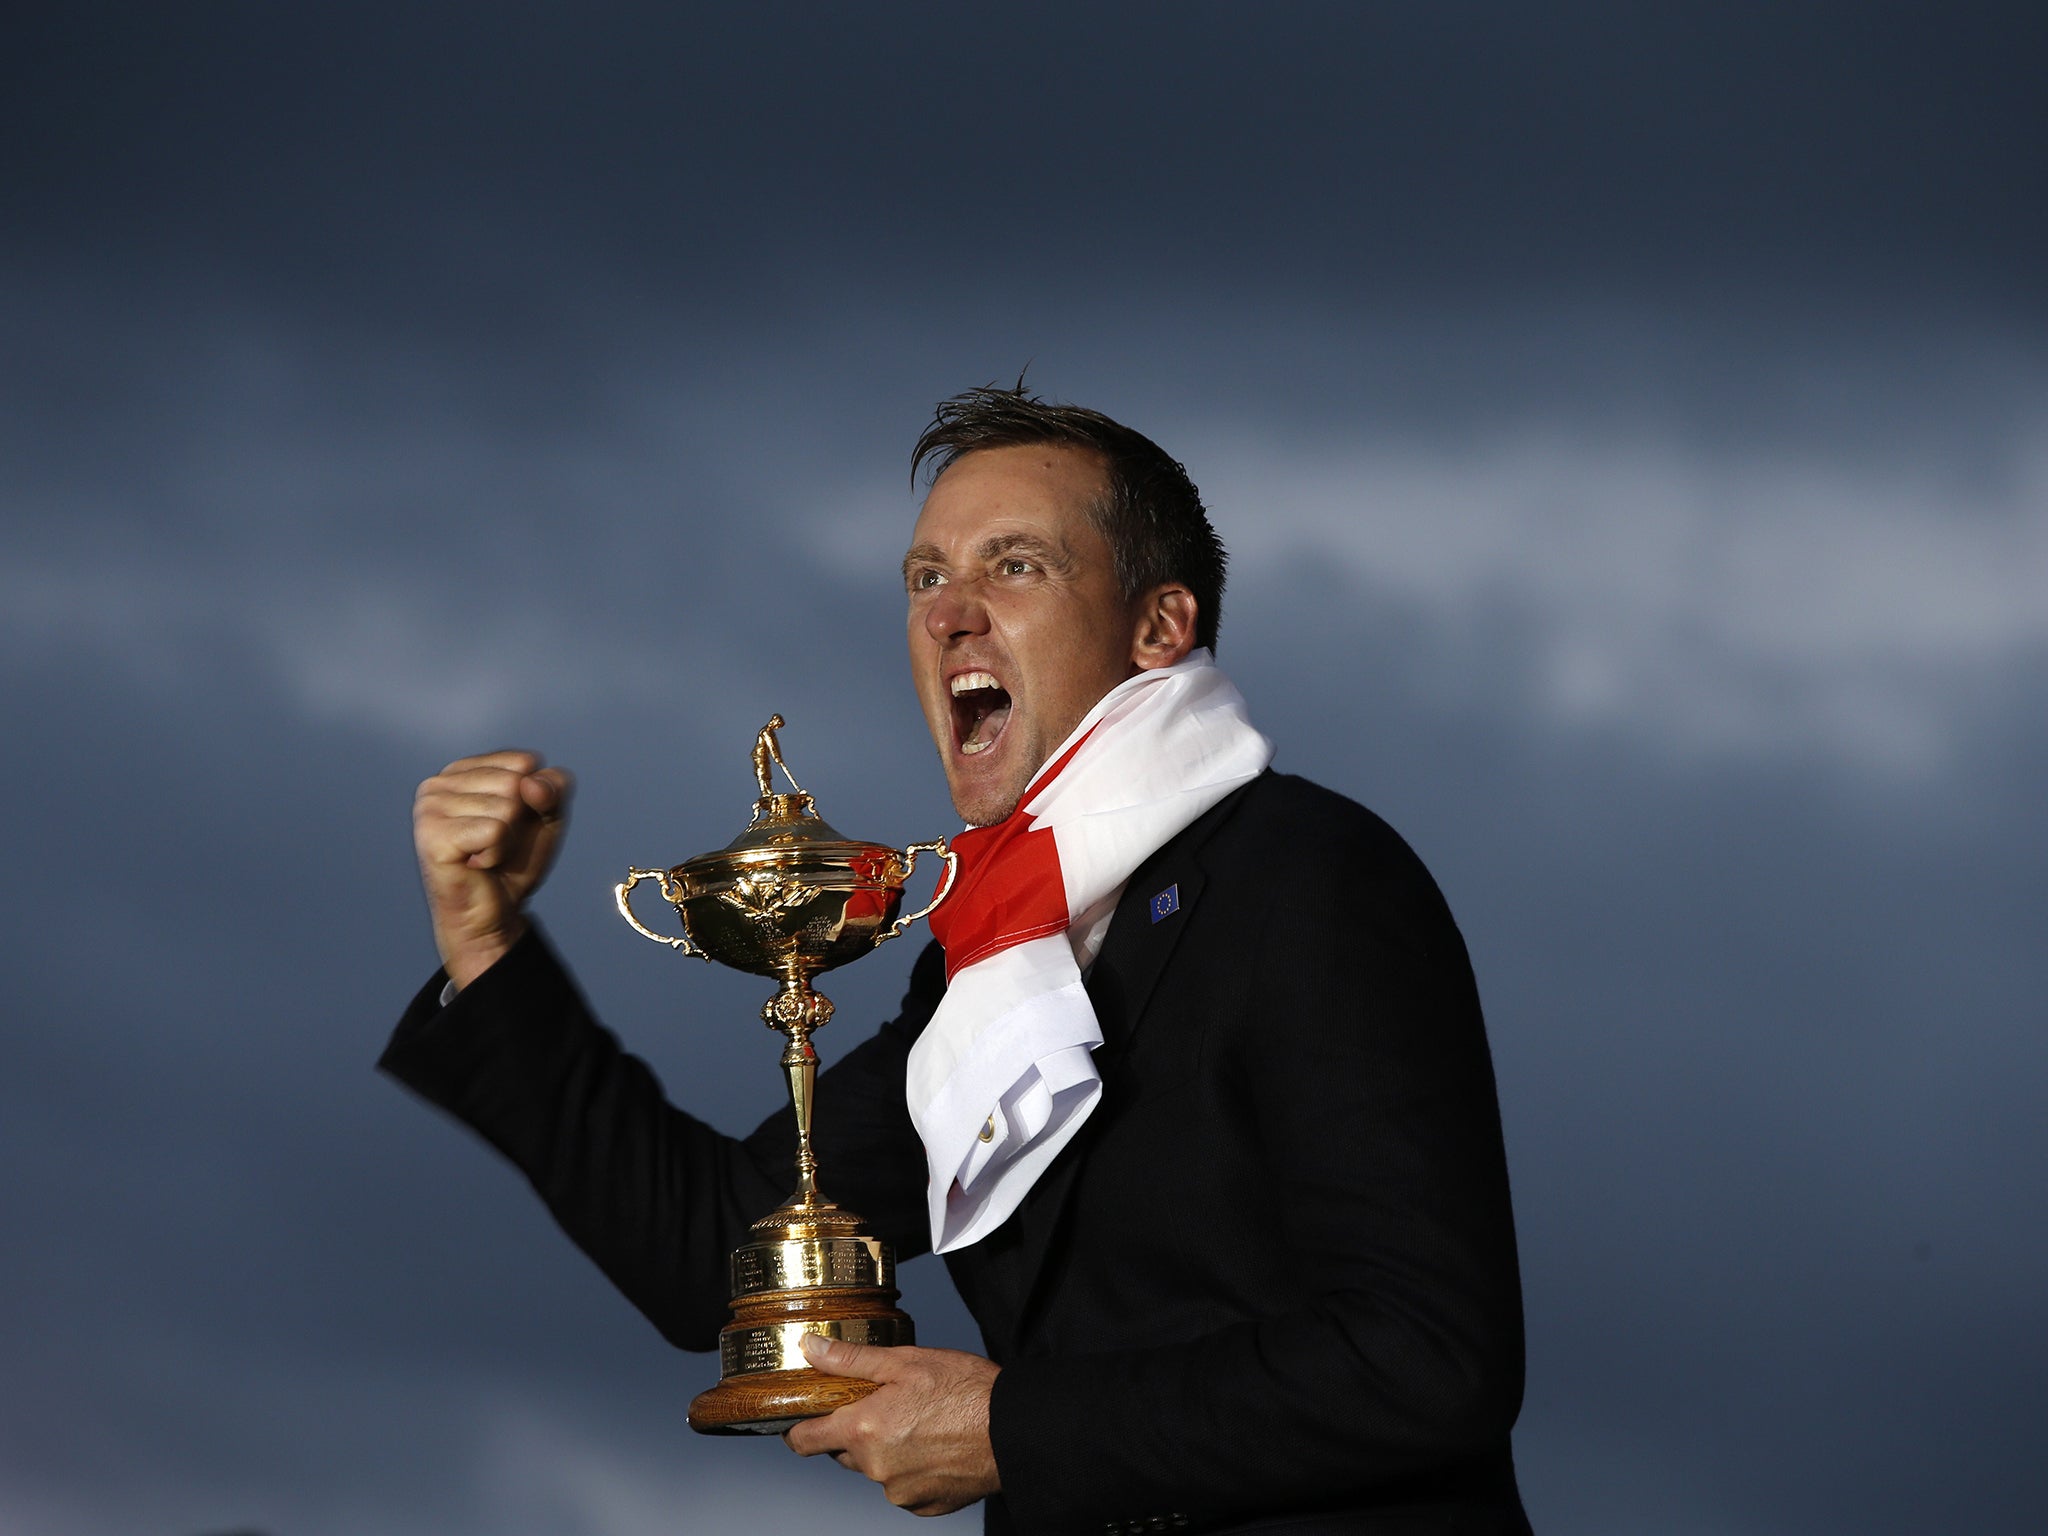 Ian Poulter of England poses with the trophy after Team Europe retained the Ryder Cup on the final day of the Ryder Cup